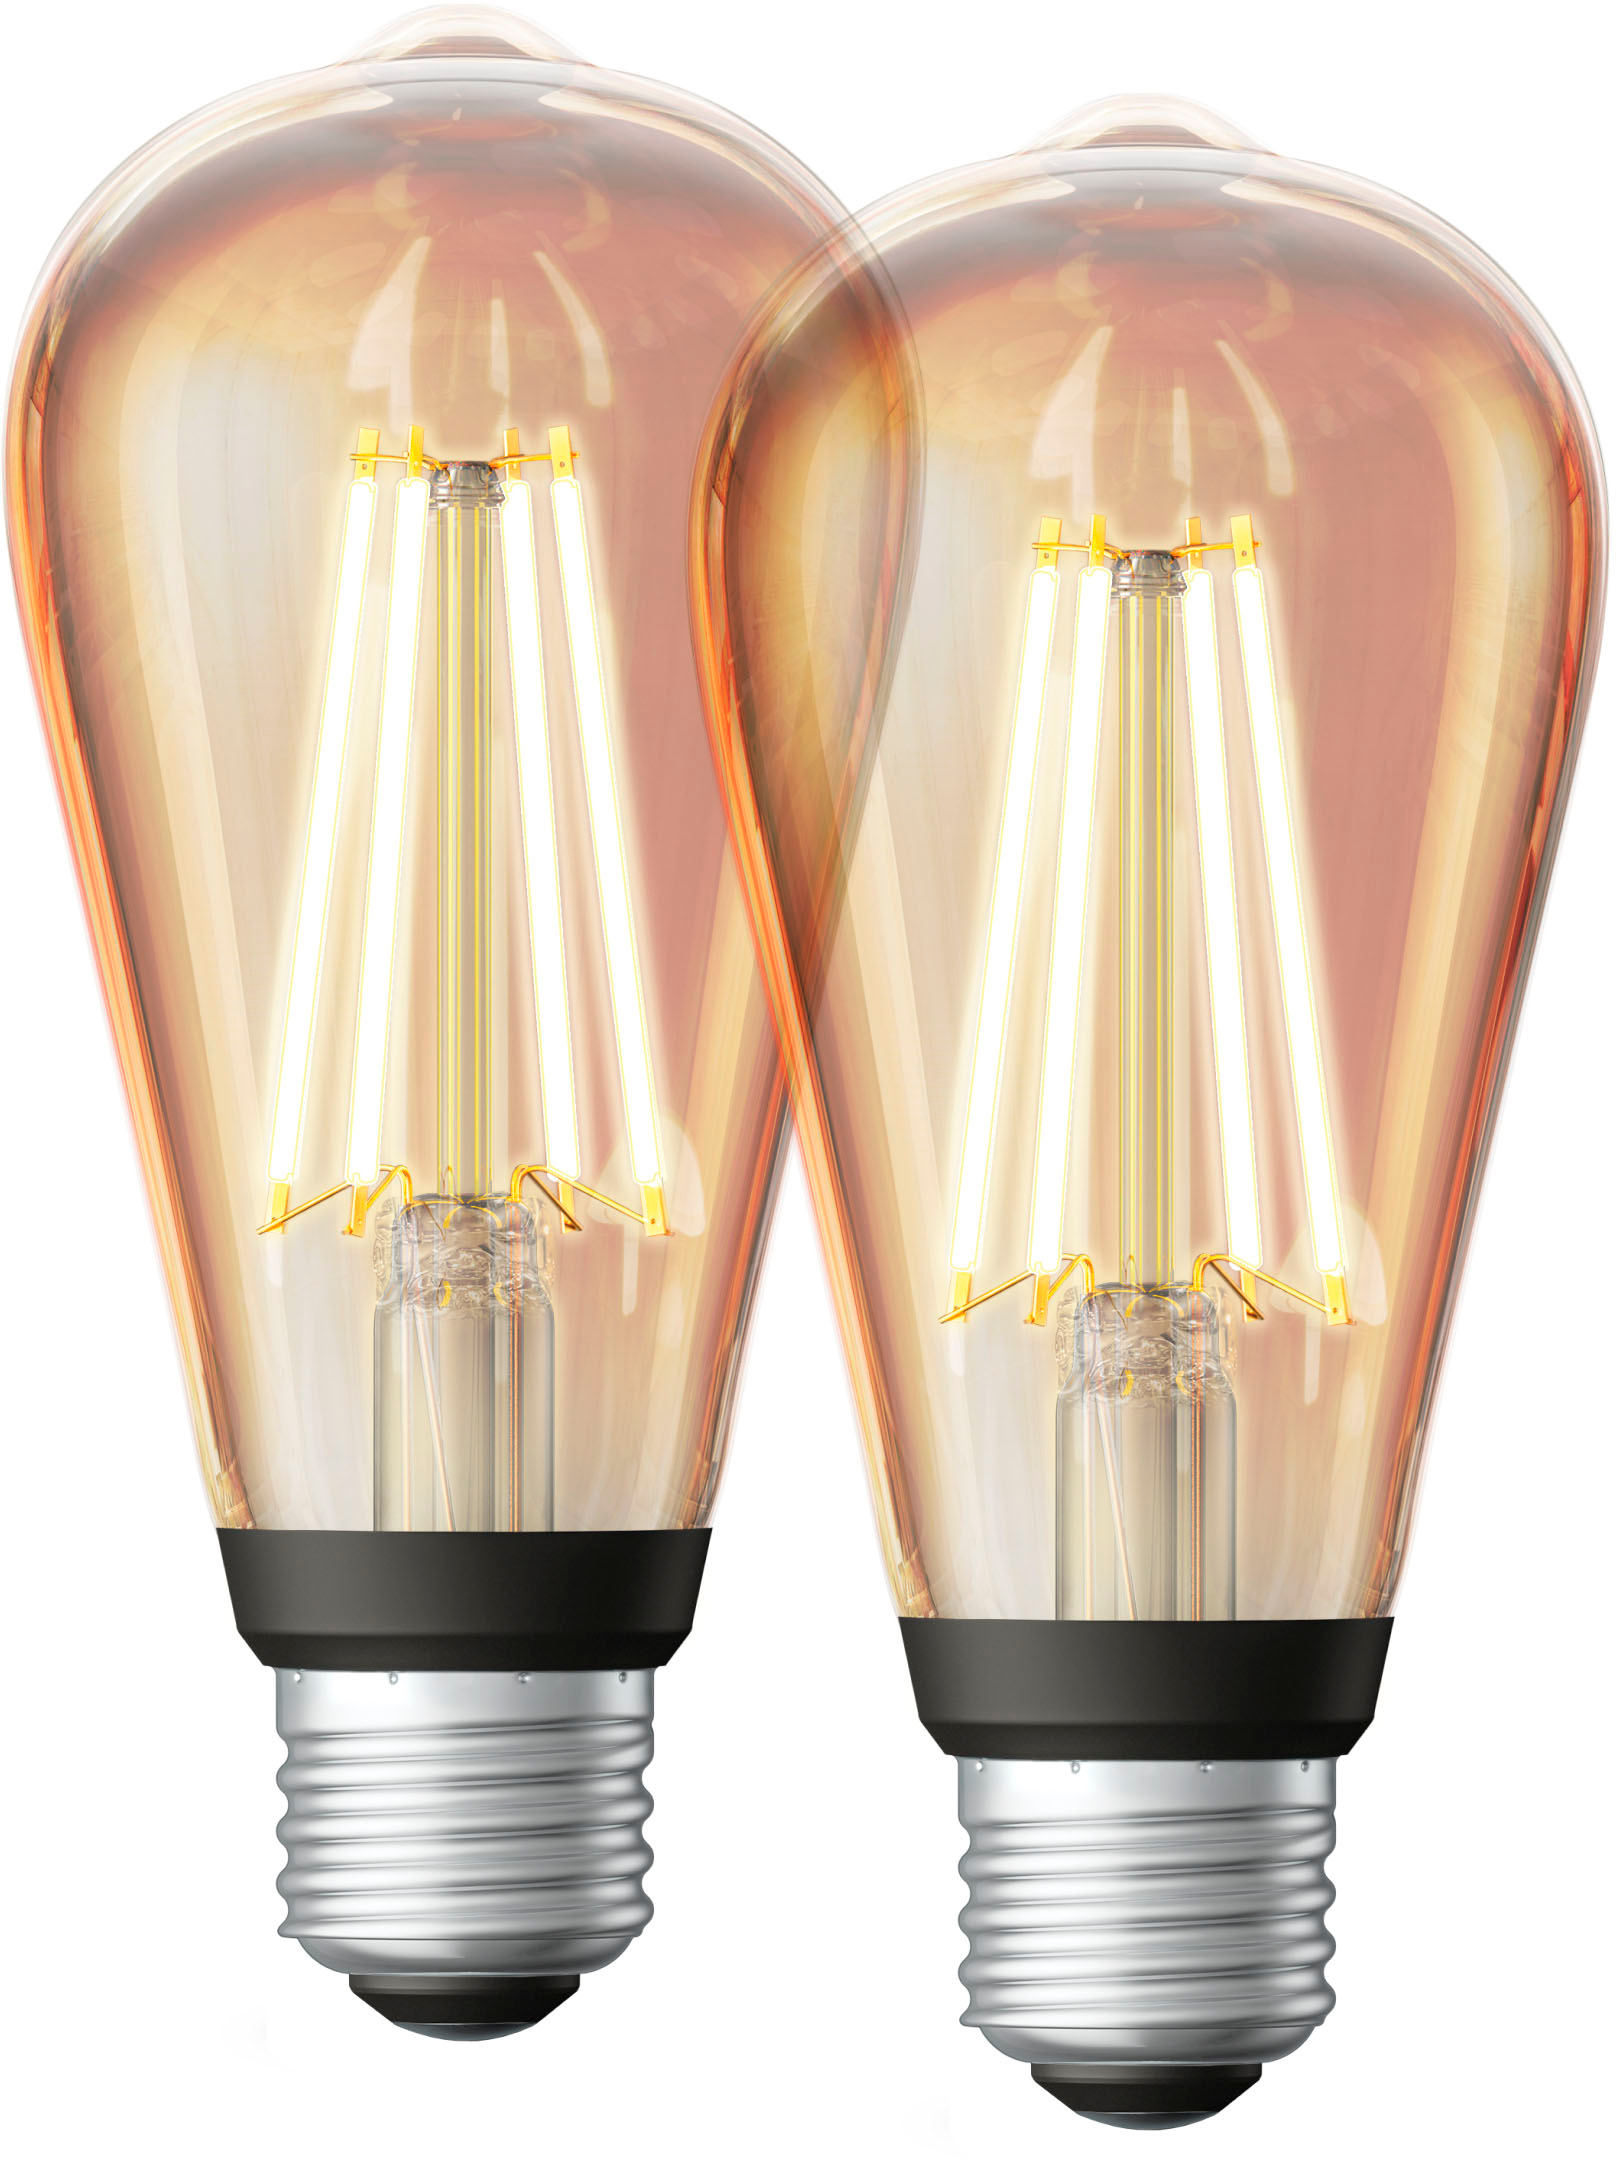 Blæse udbytte dash Sengled Smart Edison Filament LED 60W Bulbs Wi-Fi Works with Amazon Alexa &  Google Assistant (2-pack) Amber W17-N11W2P - Best Buy